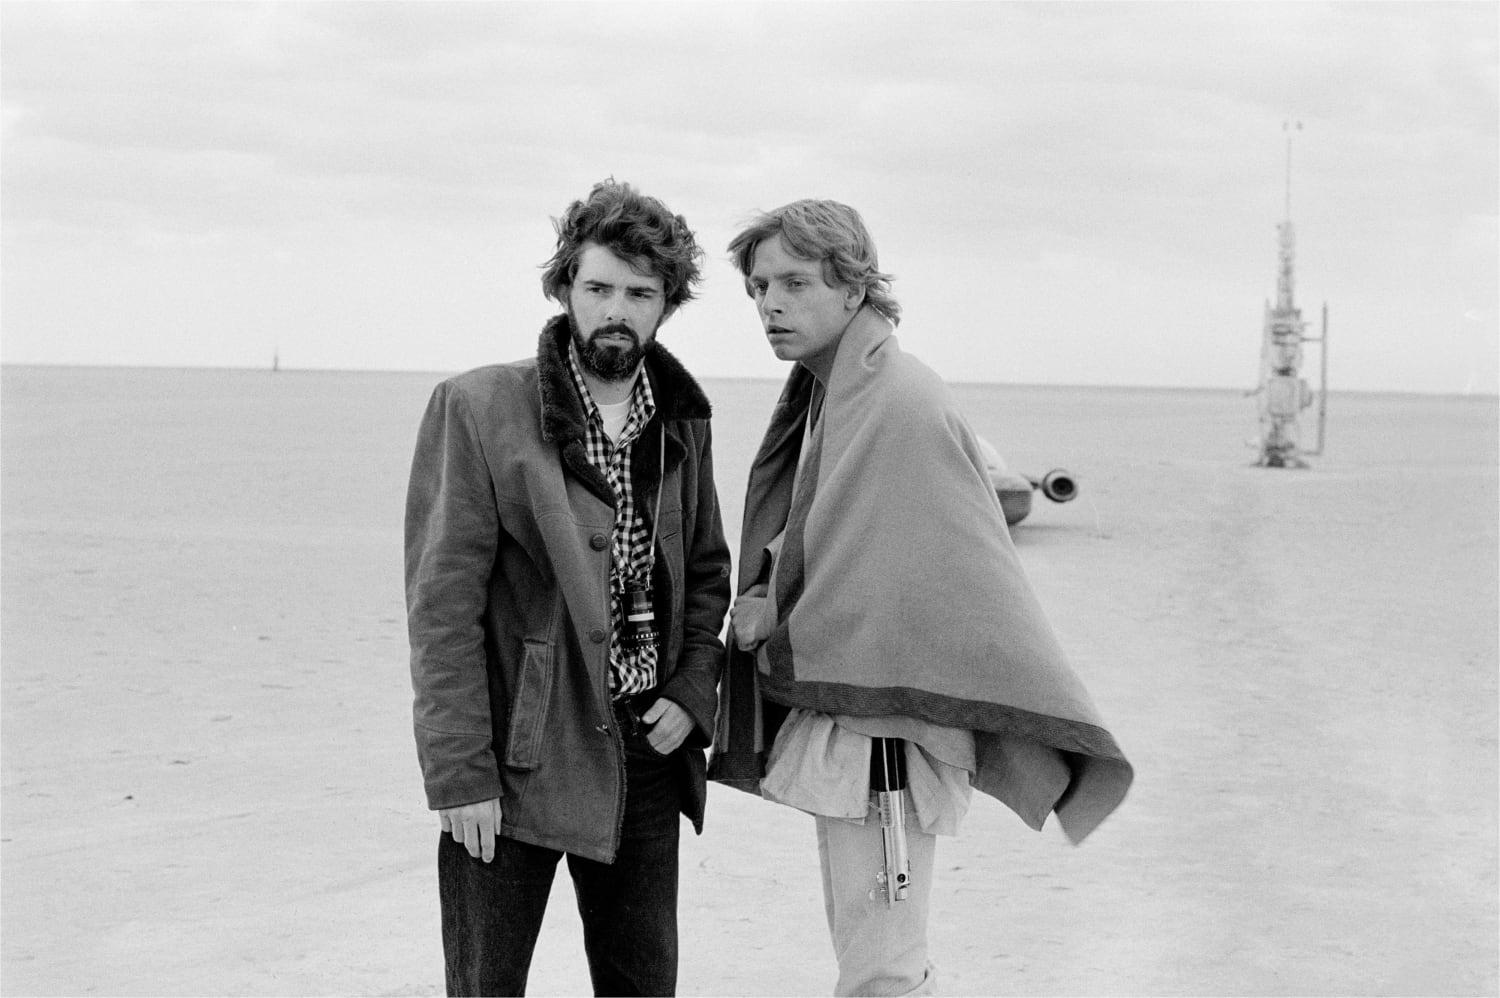 George Lucas and Mark Hamill on the set of A New Hope, 1977